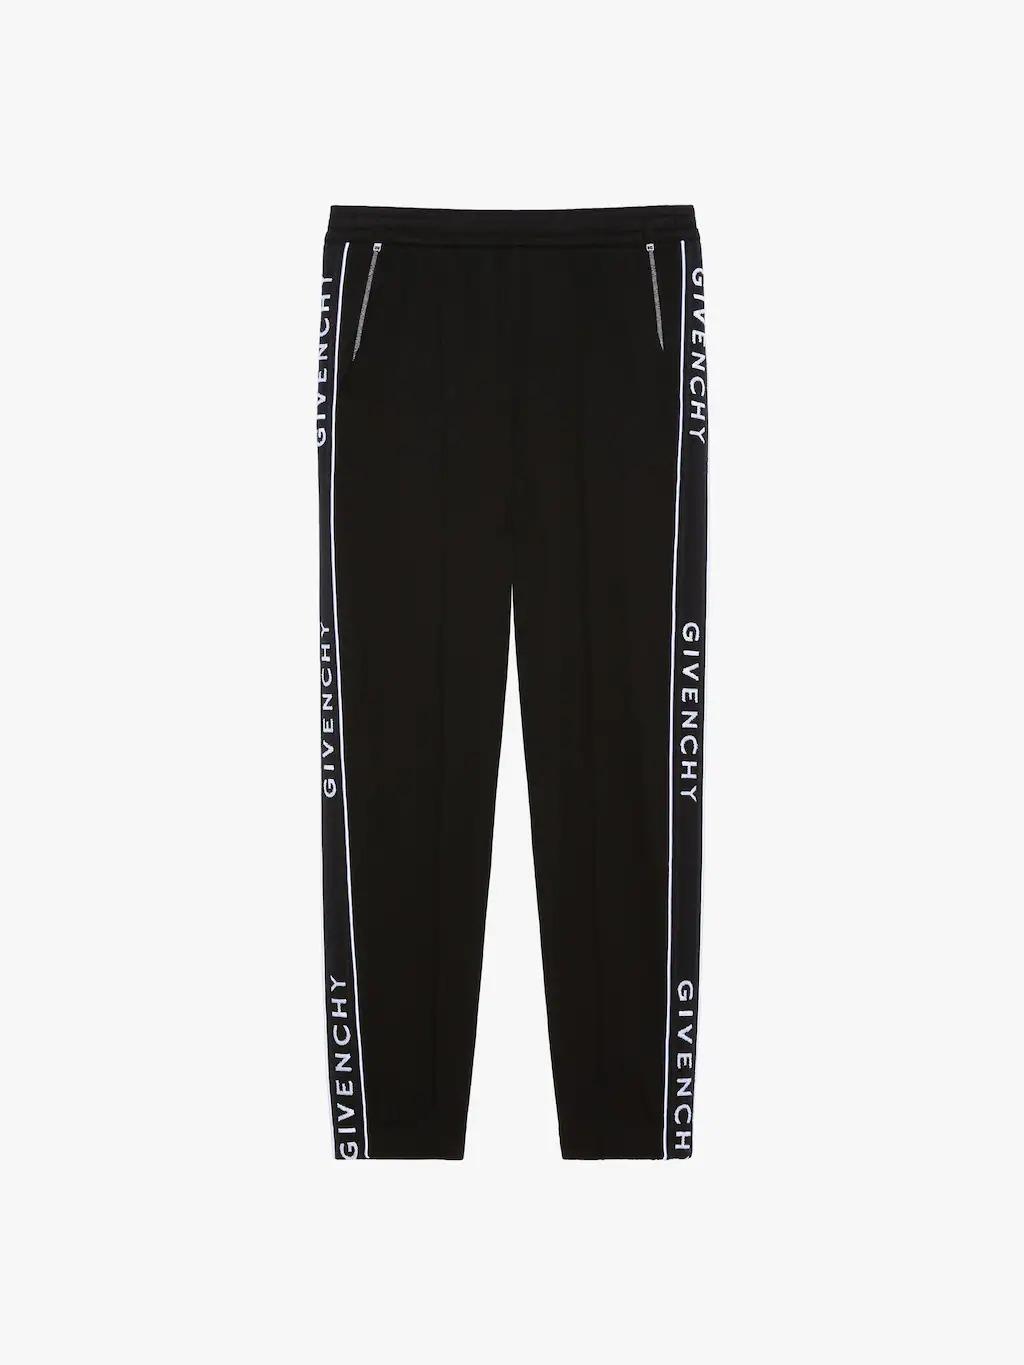 slim-fit-jogger-pants-in-jersey-with-givenchy-bands-6628_16845014231-1000